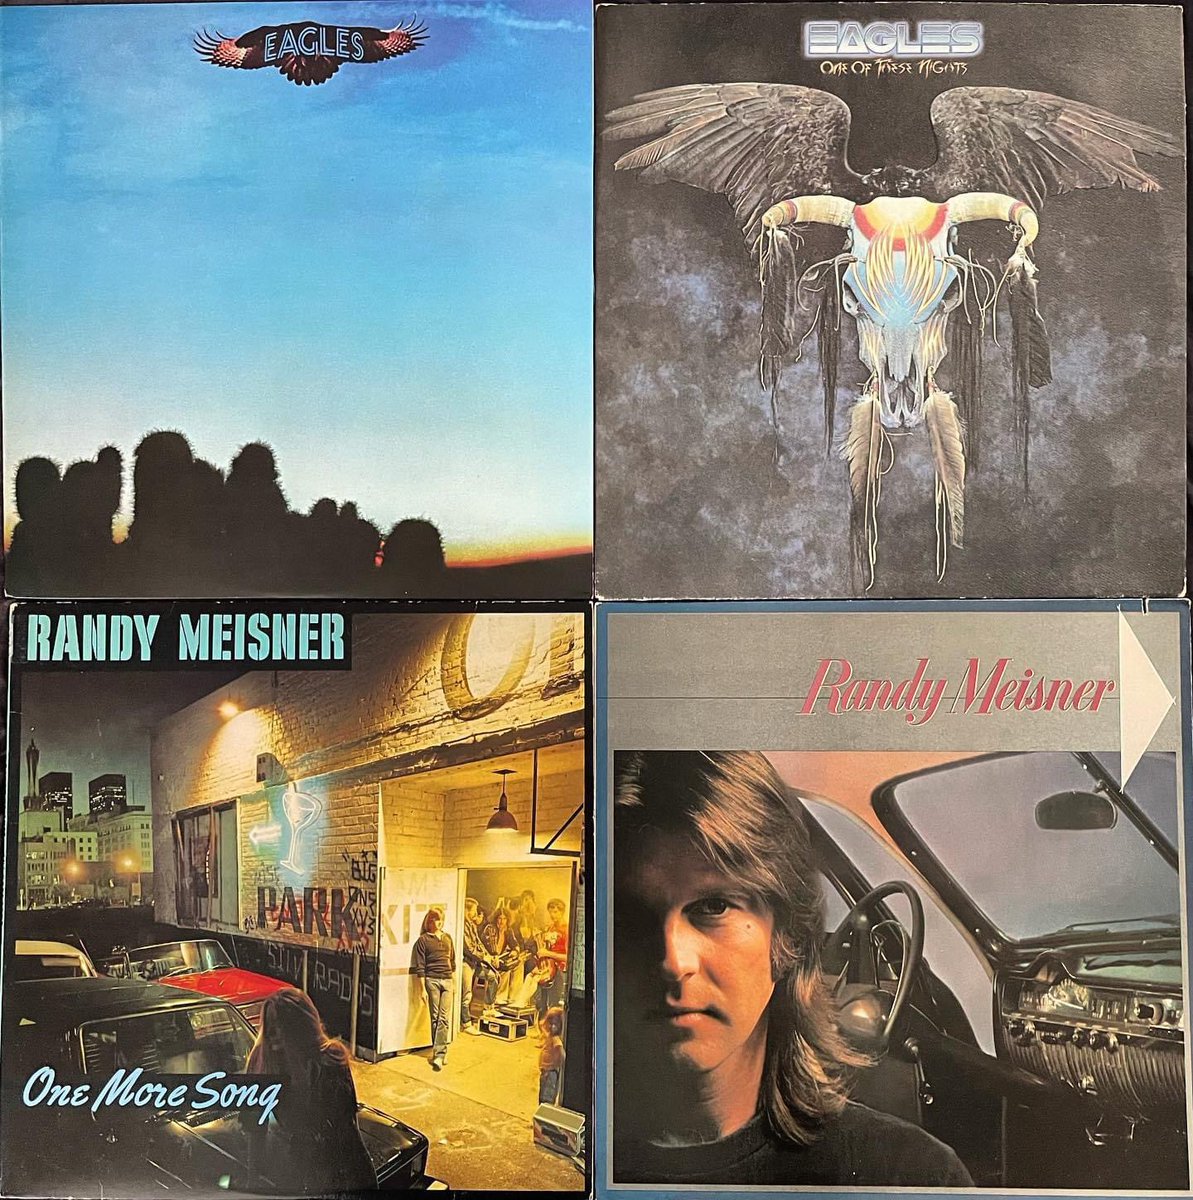 Just me and Randy against the world today! 🫶🤍🎶

#RandyMeisner #Eagles #OneMoreSong #TakeItToTheLimit #HeartsOnFire #Vinyl #VinylJunkie #VinylRecords #VinylCollection #Music #MusicIsLife